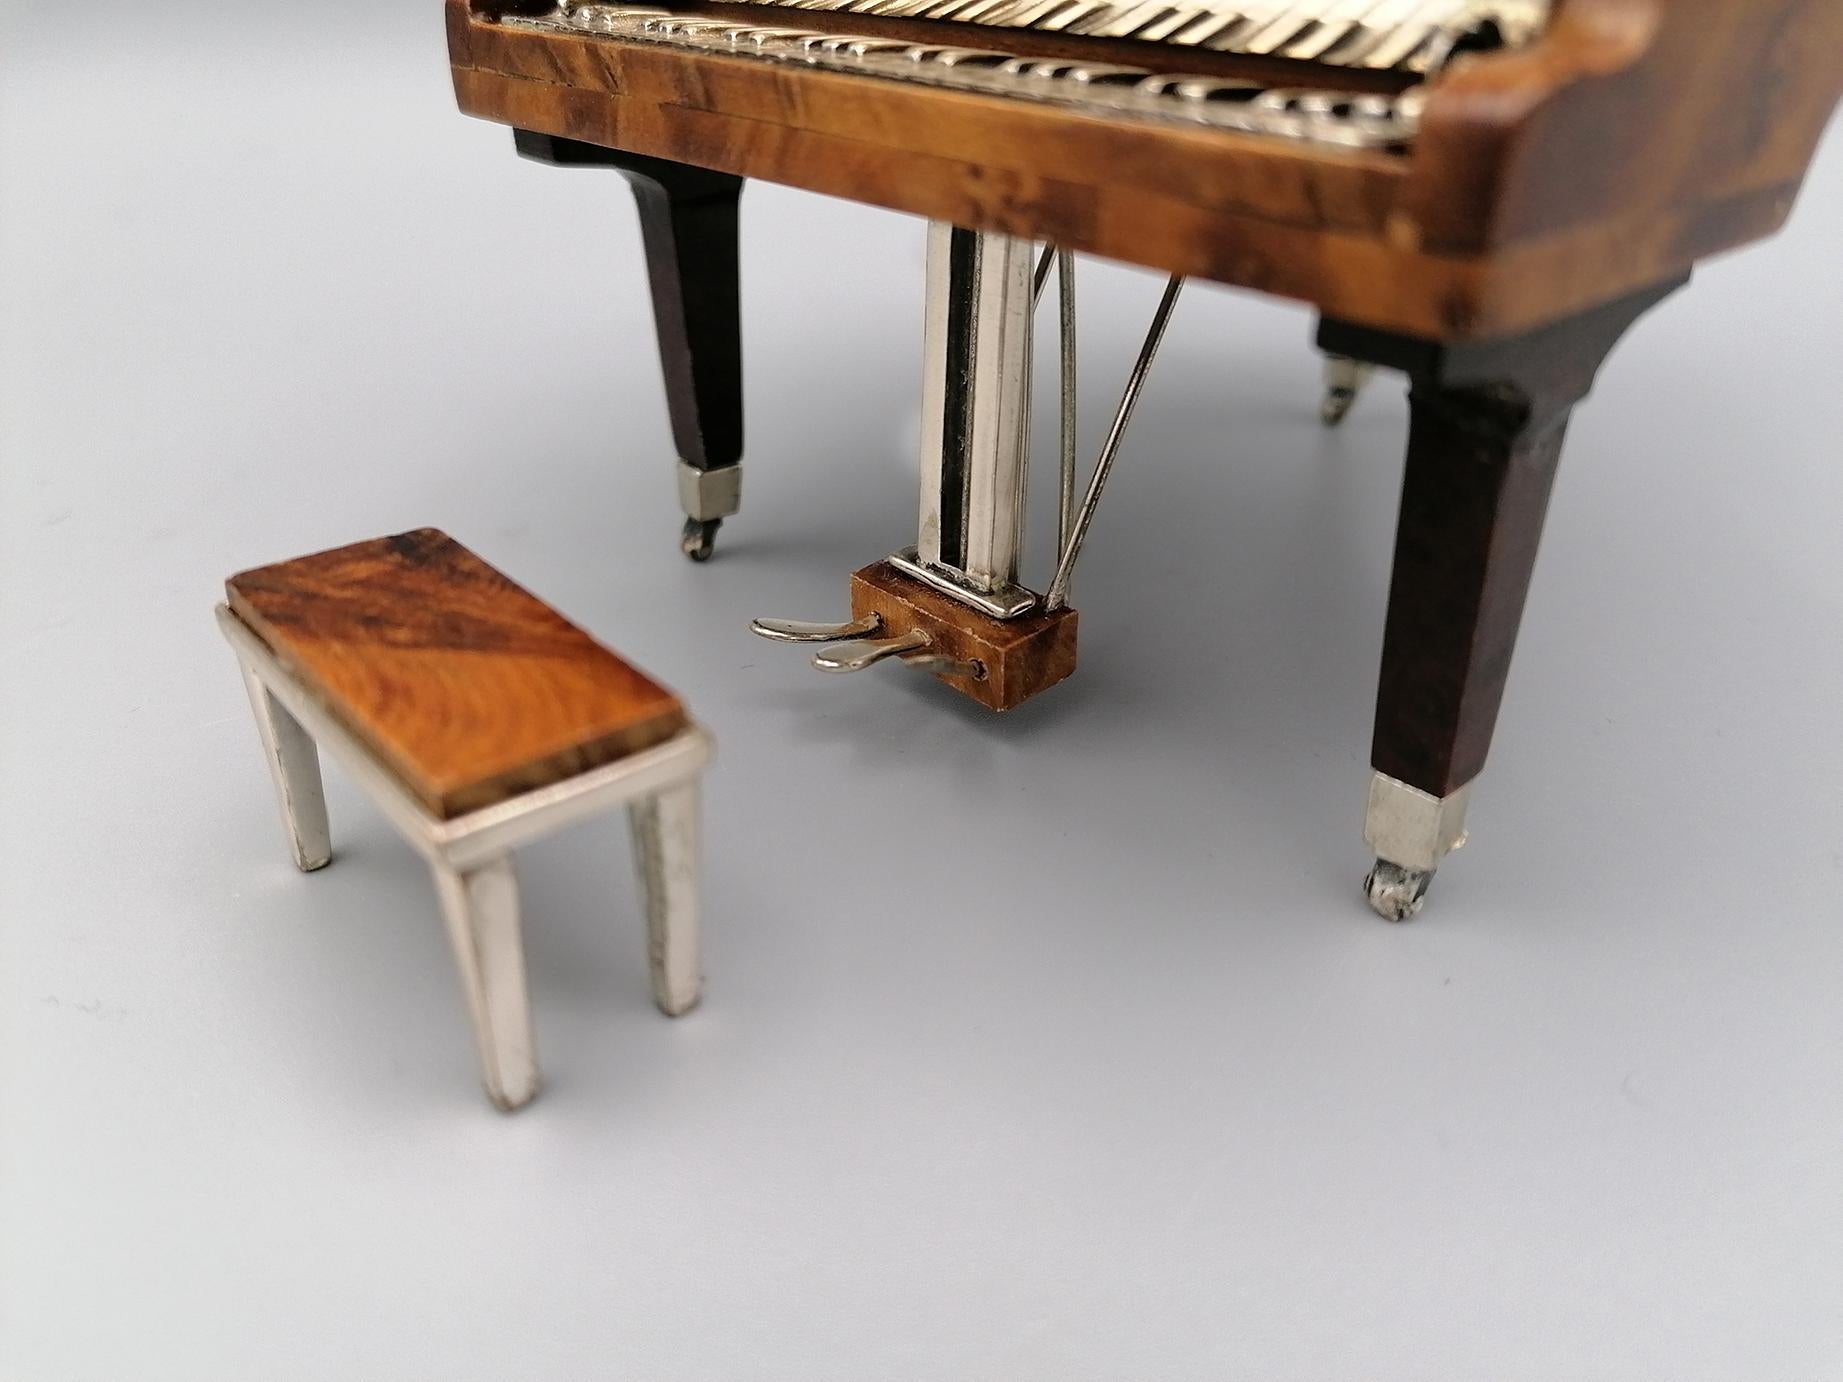 Hand-Carved 20th Century Italian Miniature Rosewood Grand Piano with Sterling Silver Details